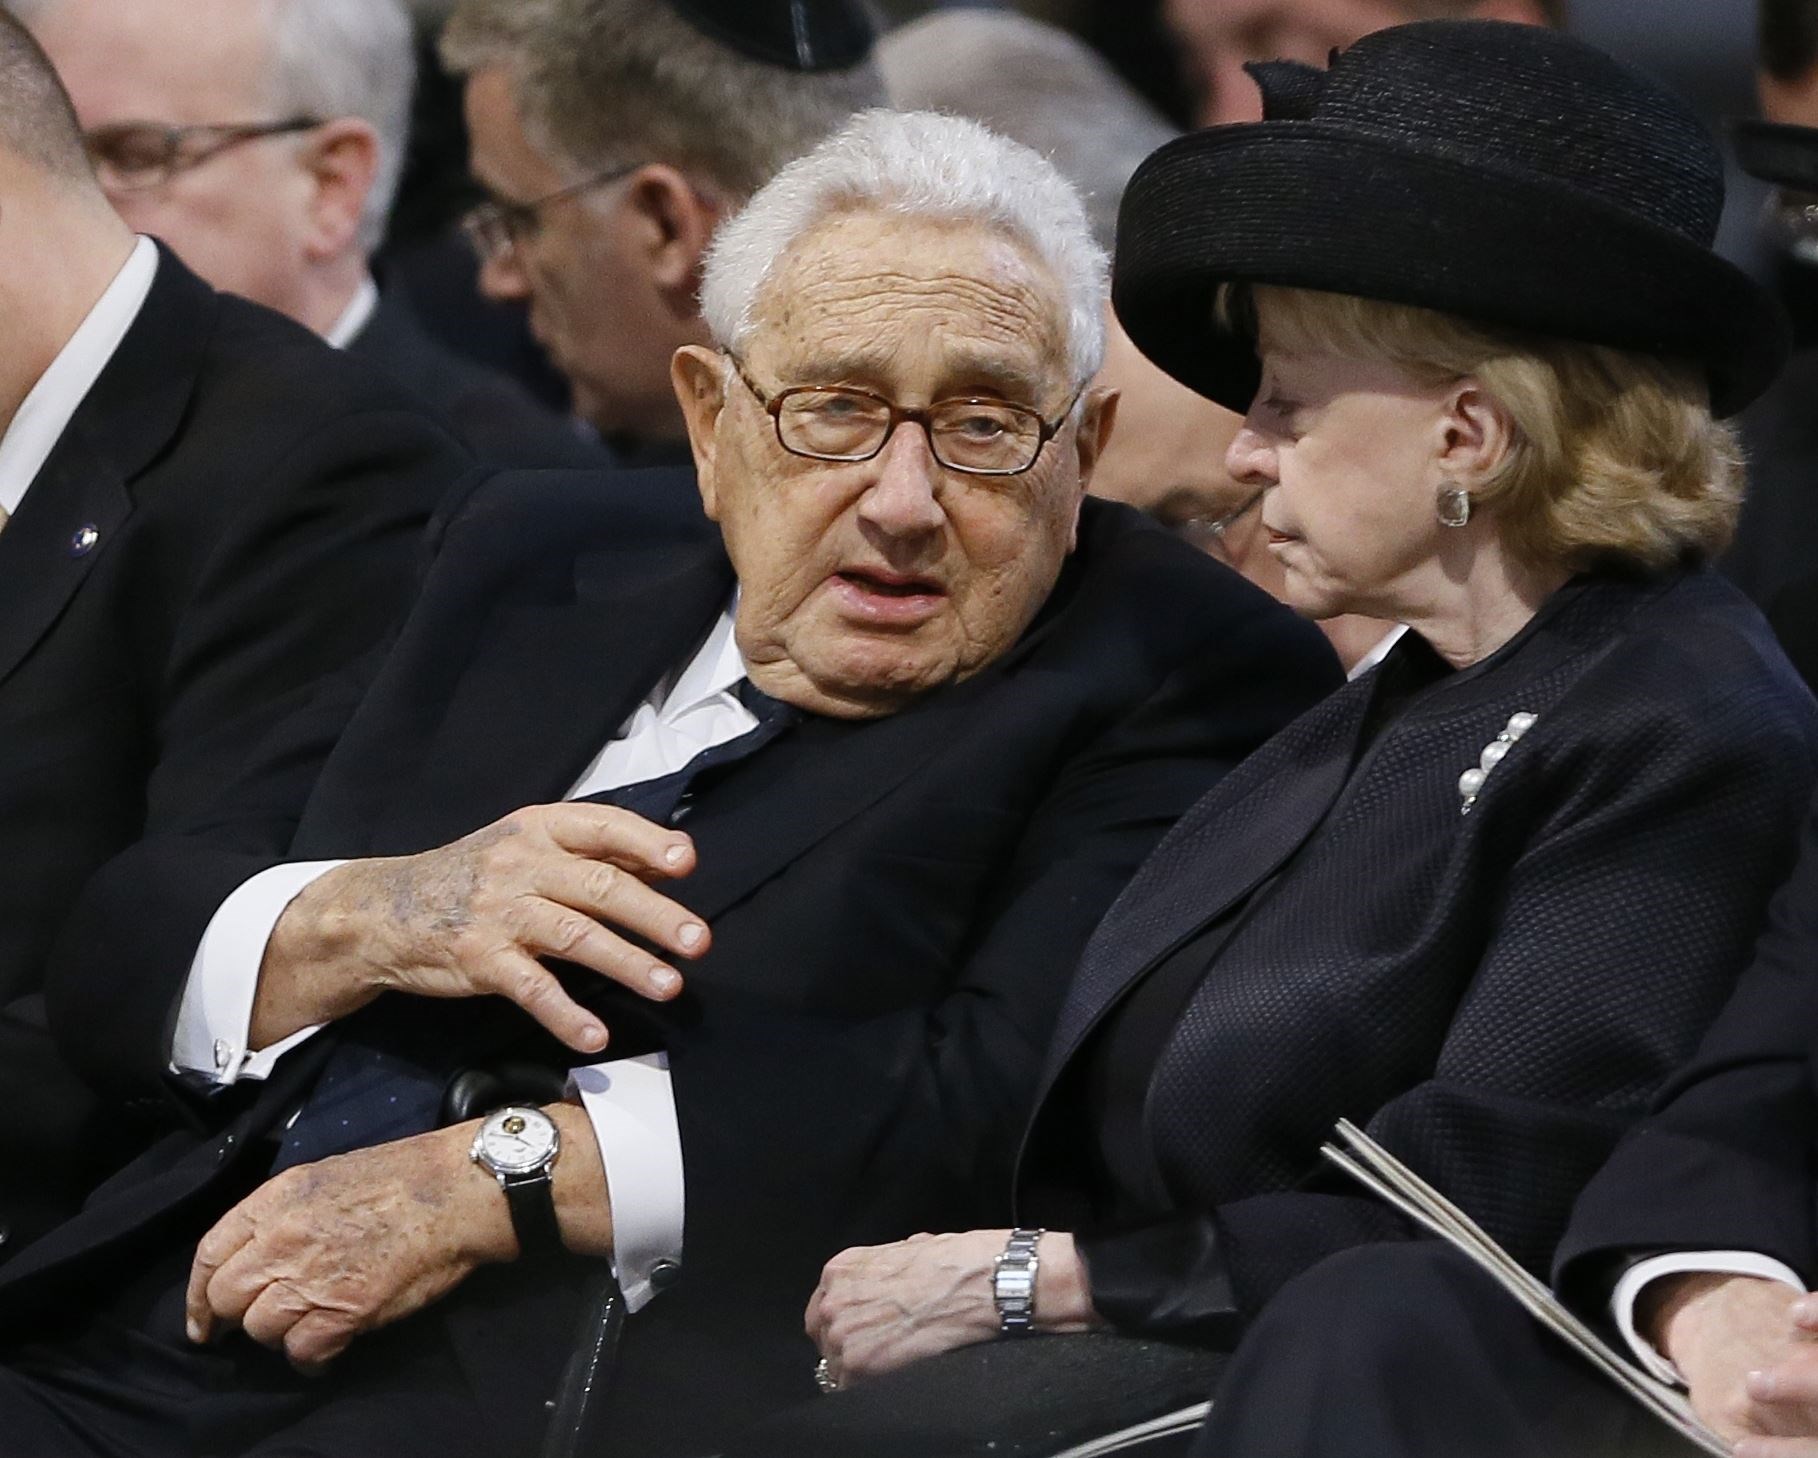 Mr Kissinger at Margaret Thatcher’s funeral at St Paul’s Cathedral in April 2013 (PA)